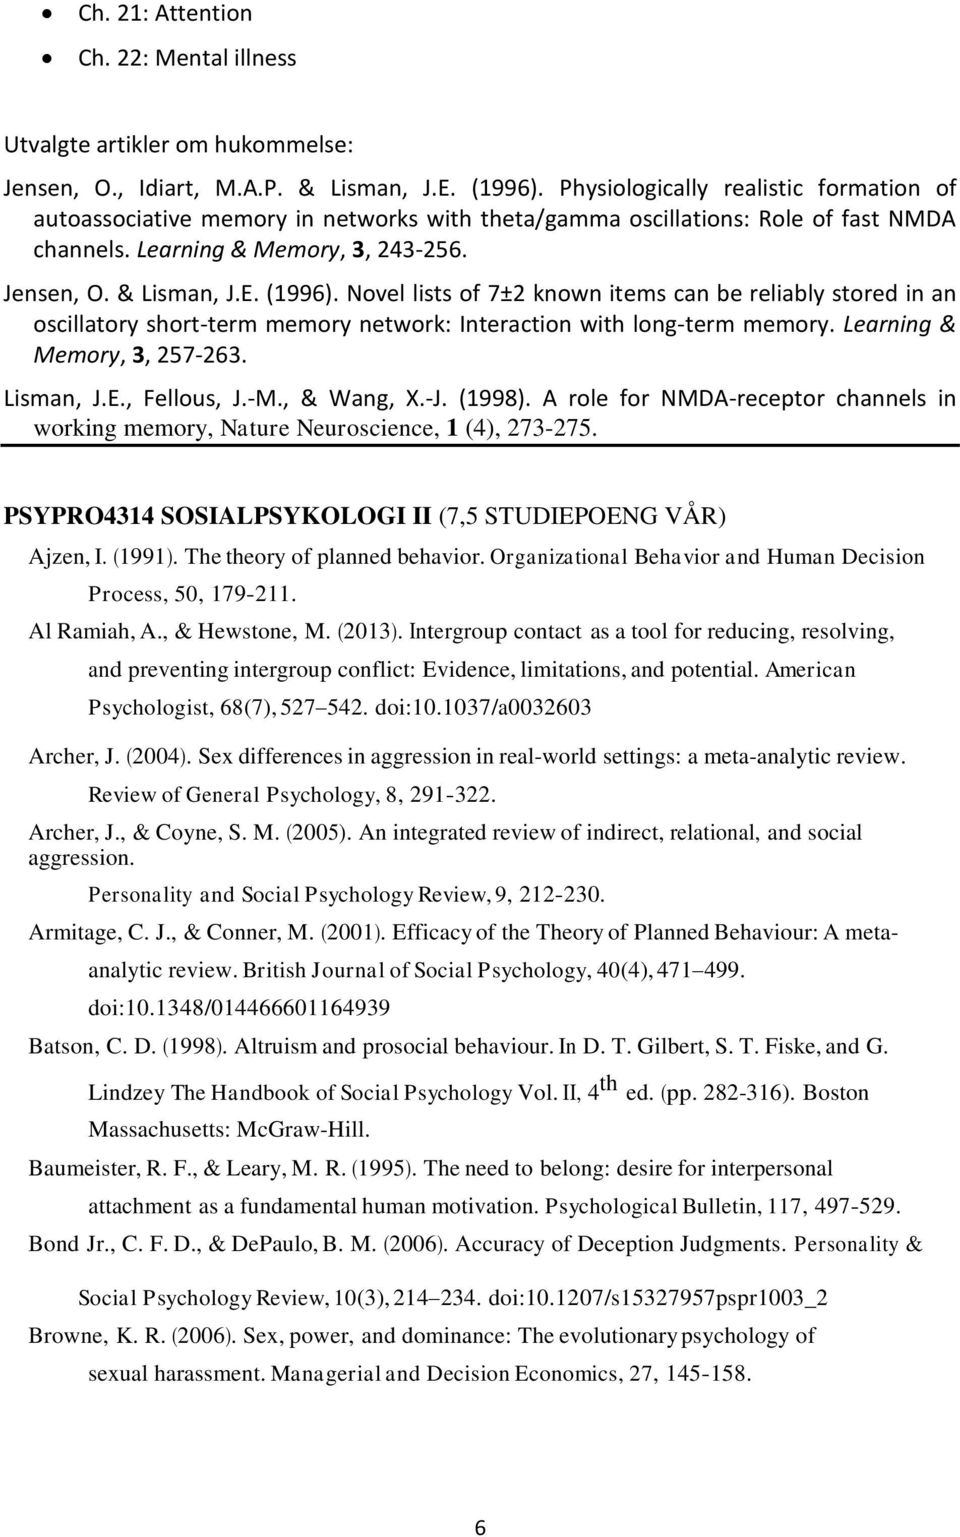 Novel lists of 7±2 known items can be reliably stored in an oscillatory short-term memory network: Interaction with long-term memory. Learning & Memory, 3, 257-263. Lisman, J.E., Fellous, J.-M.